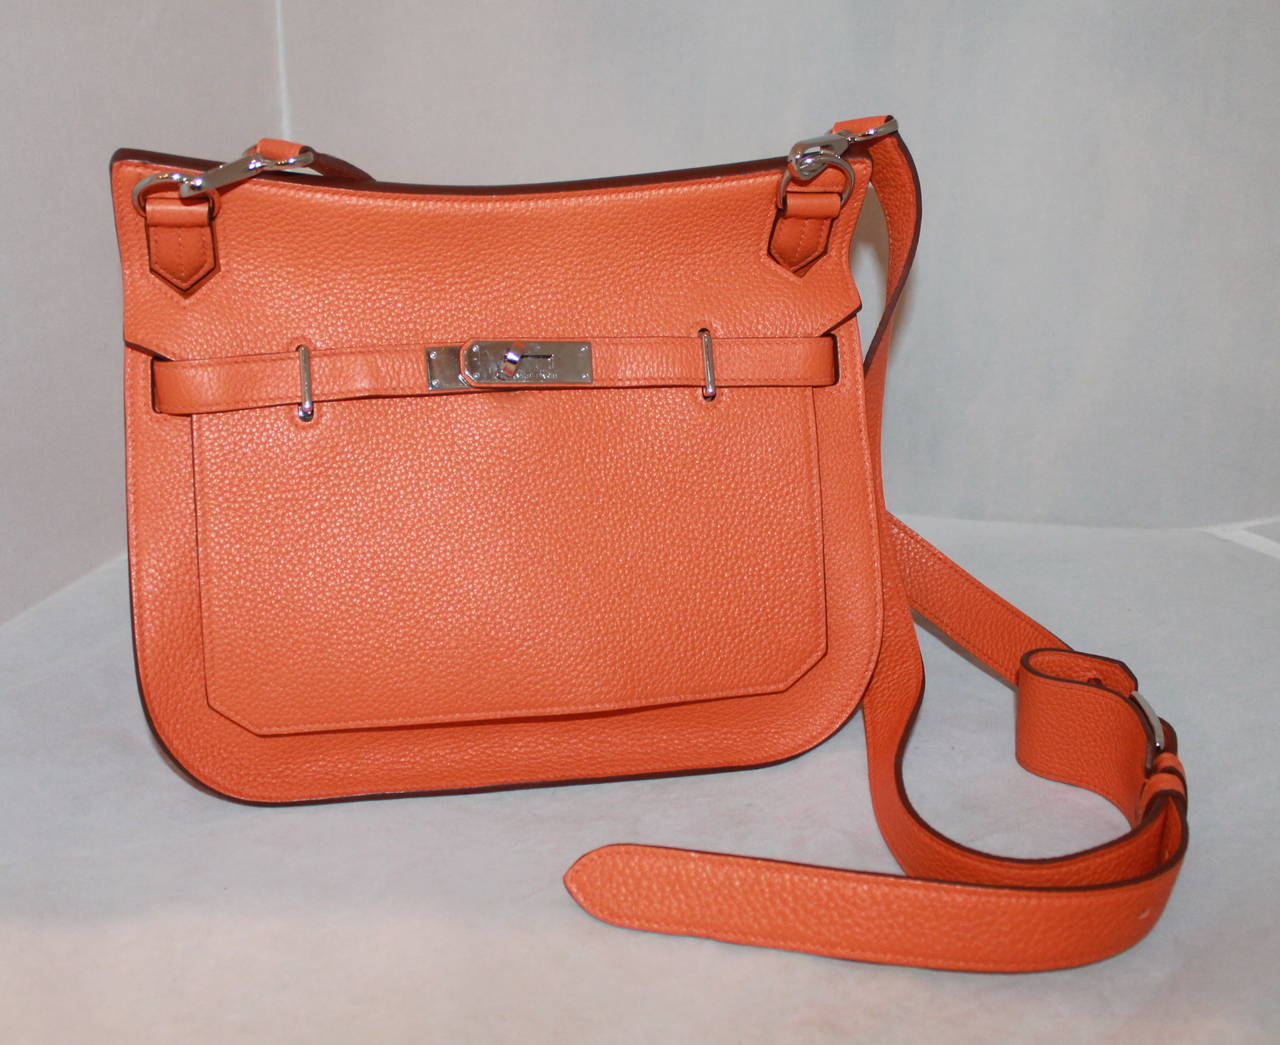 Hermes Orange Crossbody Jypsiere 28 cm - circa 2012. This handbag is in excellent condition and comes with a box, duster, and components. It has some scuffing on the hardware.

Measurements:
Length- 8.75